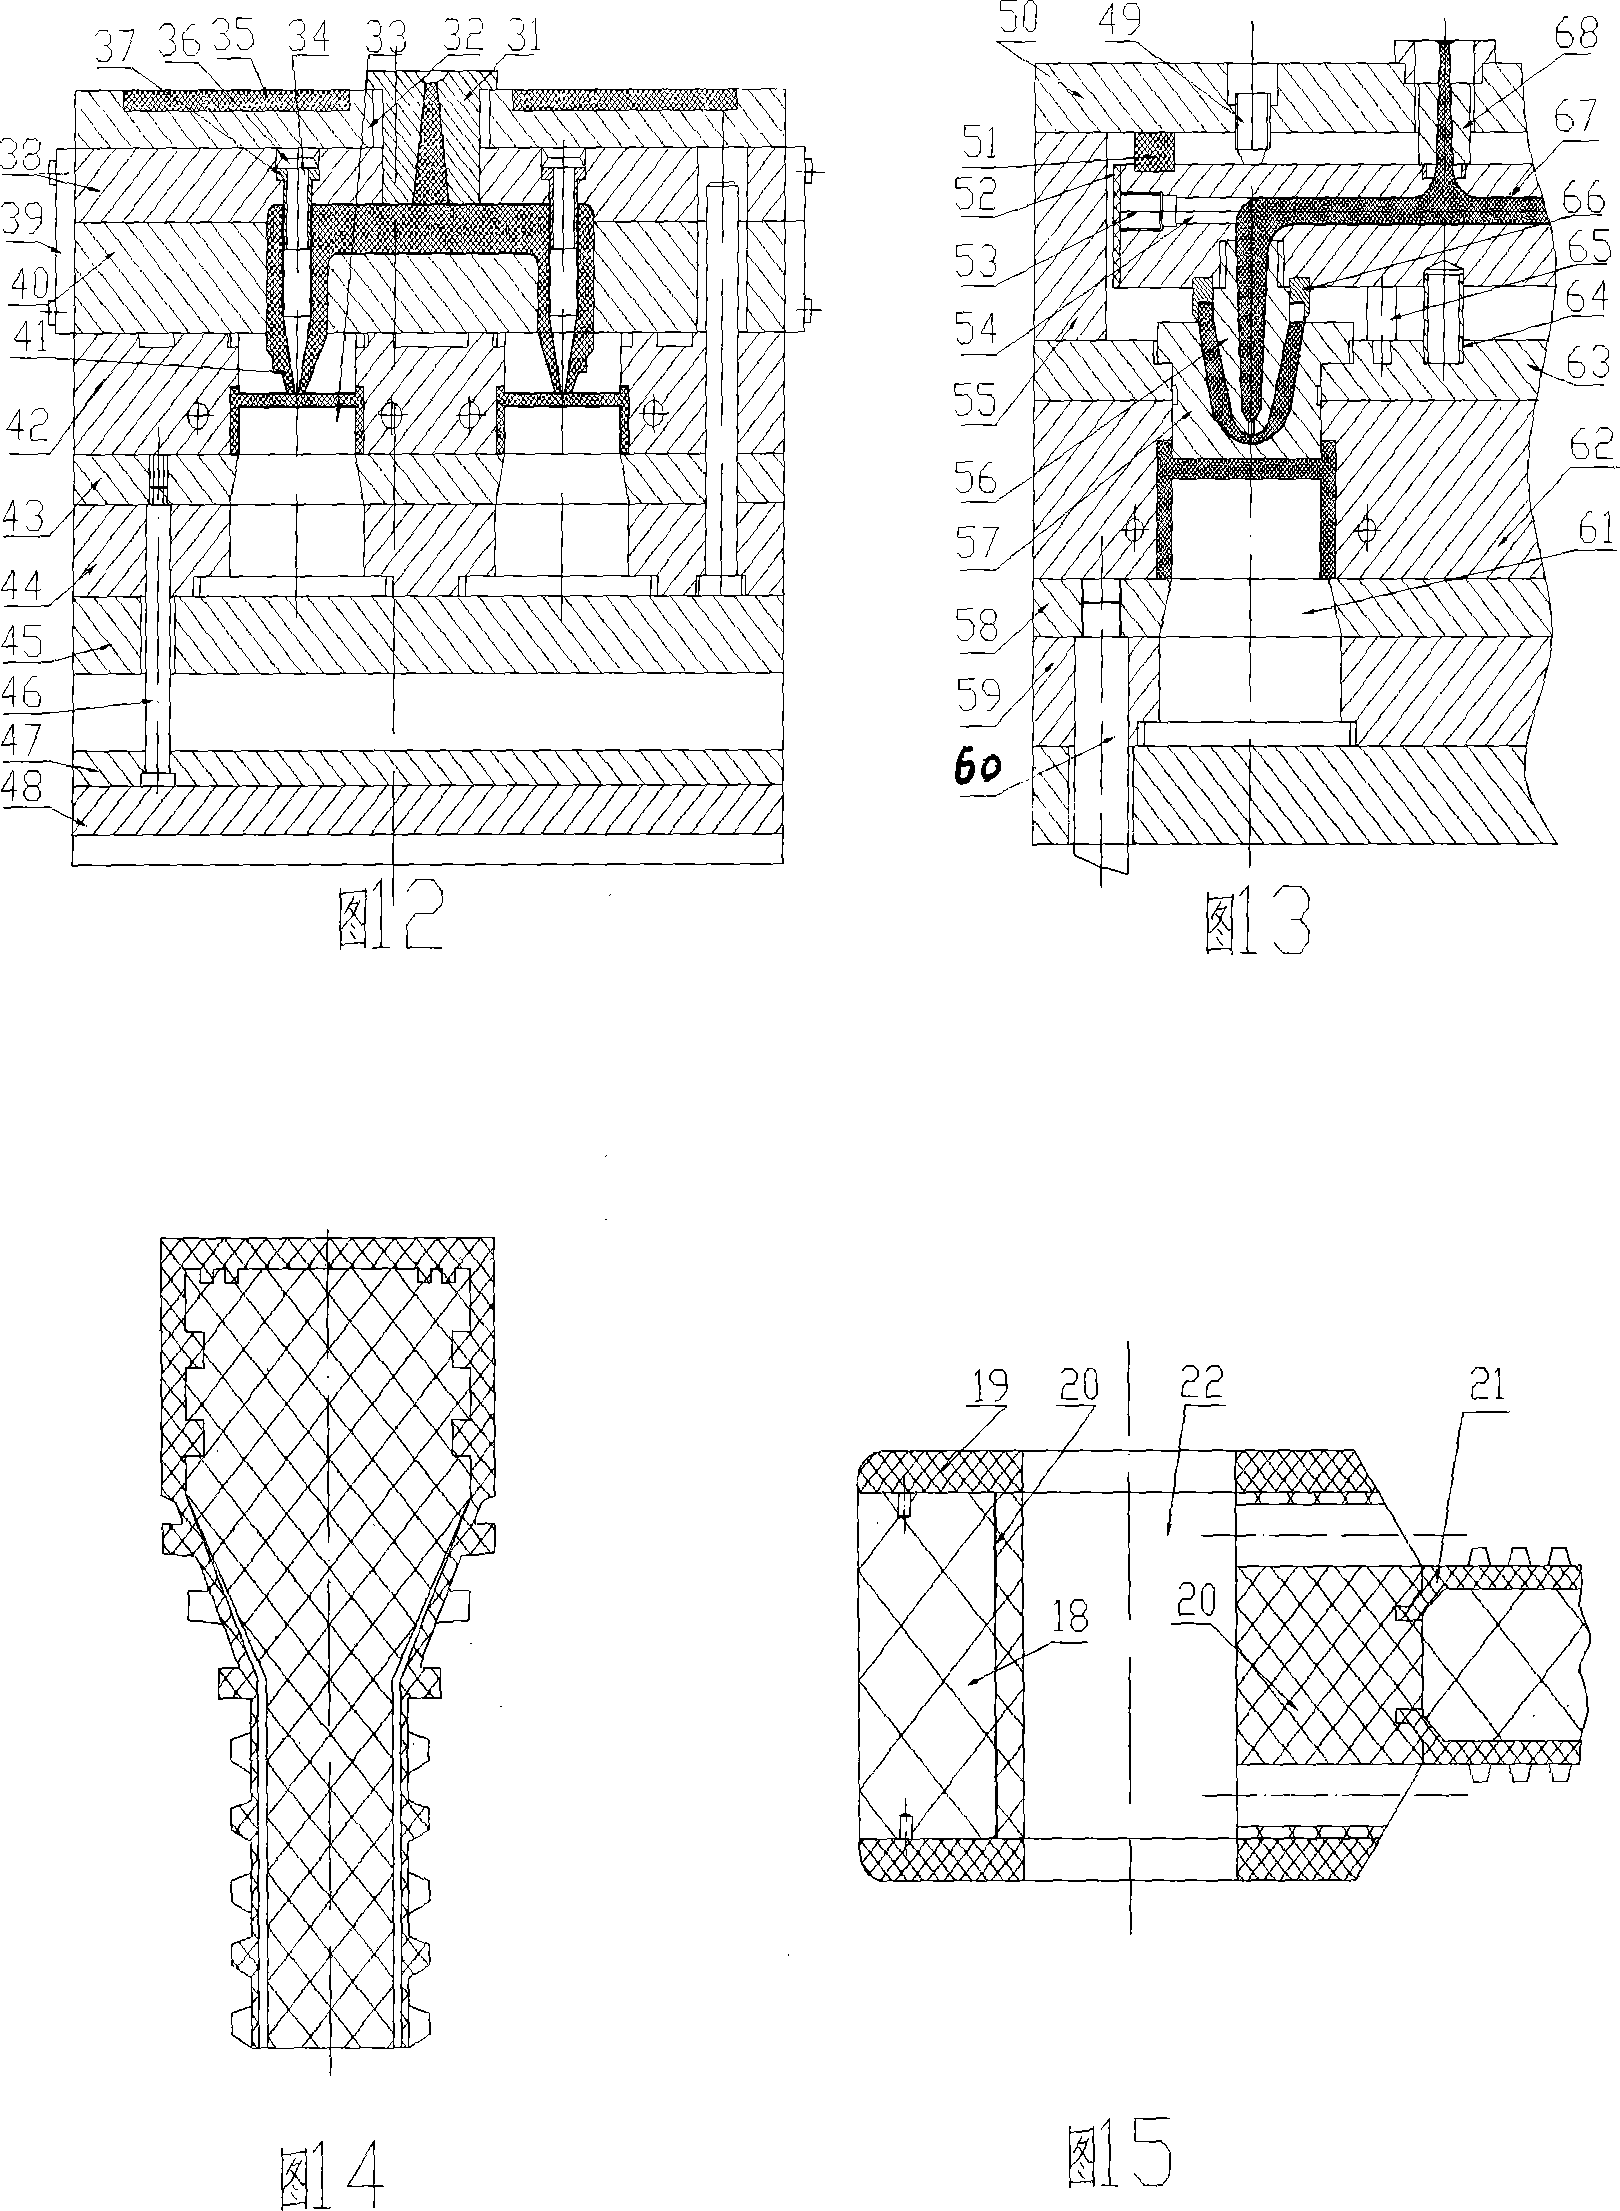 High efficiency multifunctional membrane and filter plate with long service life, and forming method